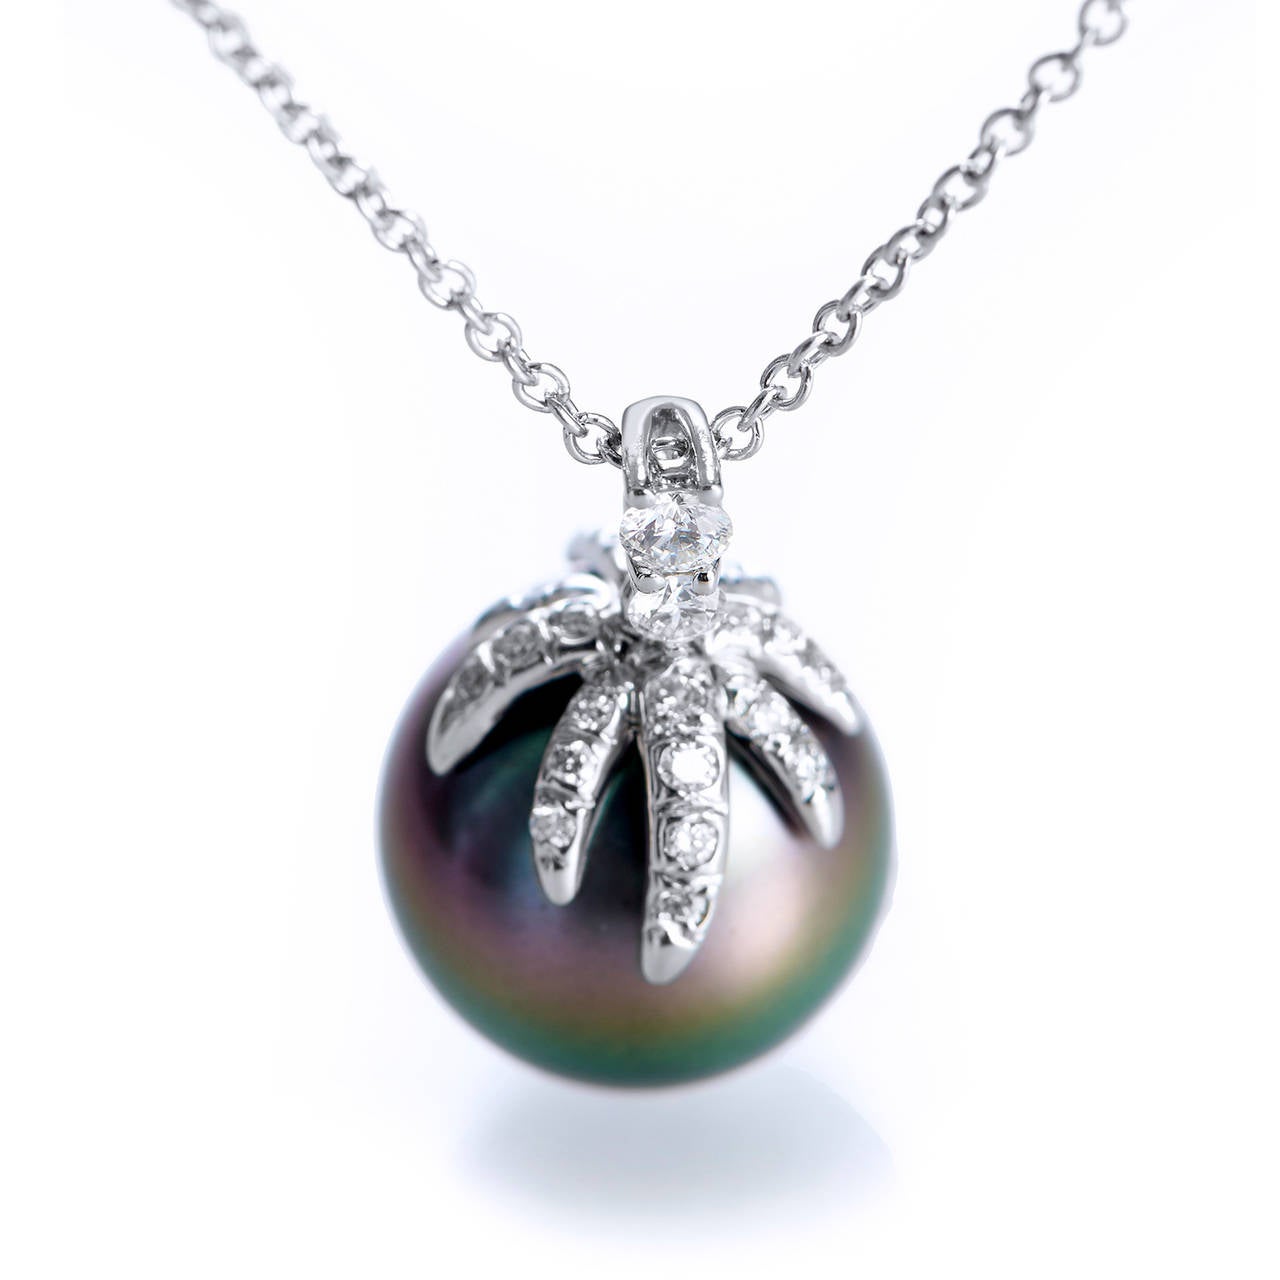 A part of Tiffany & Co.’s retired “Fireworks” collection, this drop necklace is a rare find. The piece features a seductive Tahitian Cultured Pearl measuring approximately 11mm grasped by a platinum claw of approximately .14 cts pave set diamonds